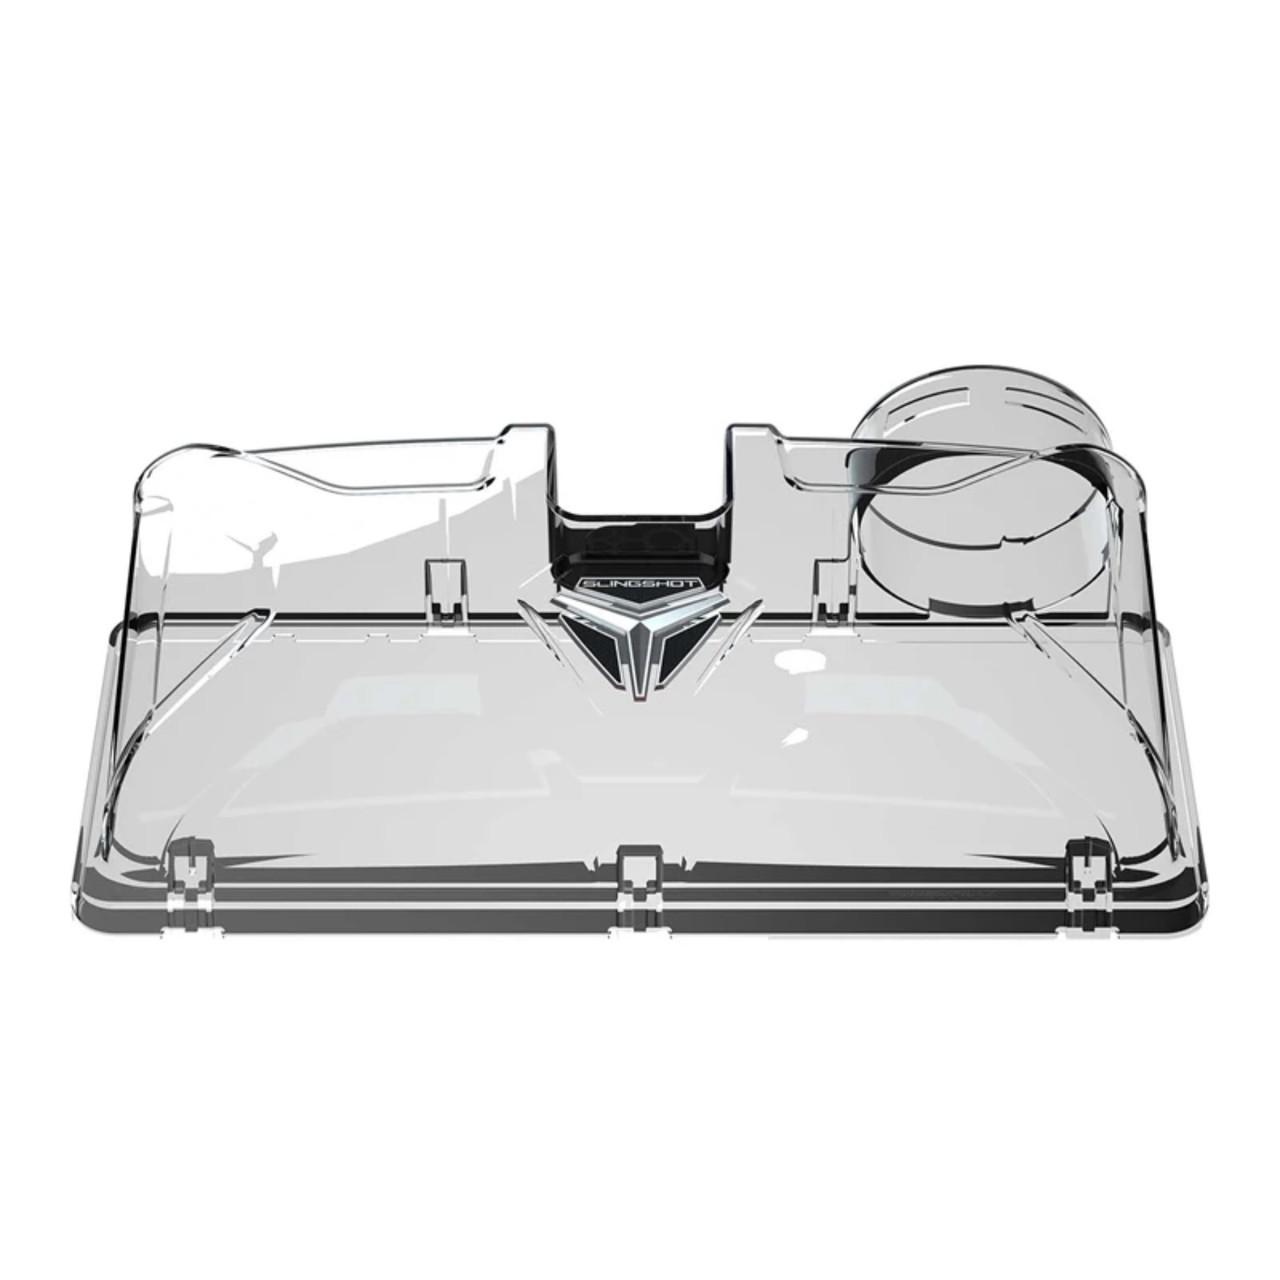 Polaris New OEM Slingshot Clear Intake Airbox Cover, 2889841